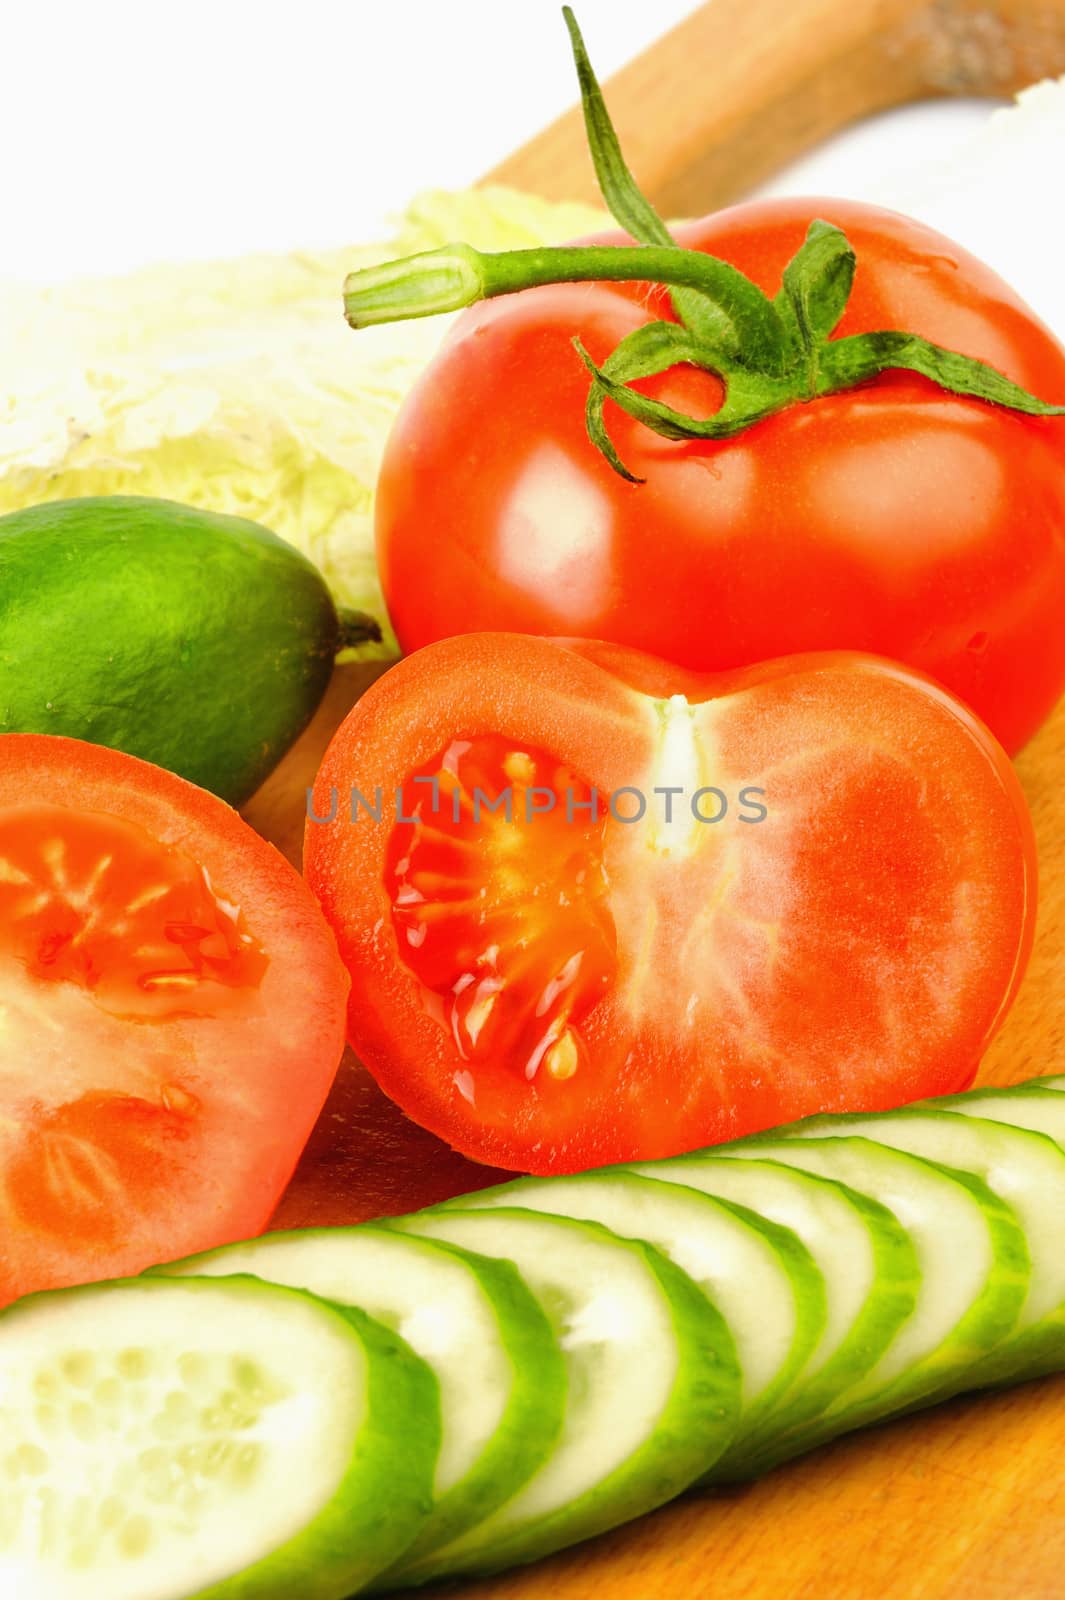 Tomatoes and cucumbers beautifully cut on the Board by kosmsos111